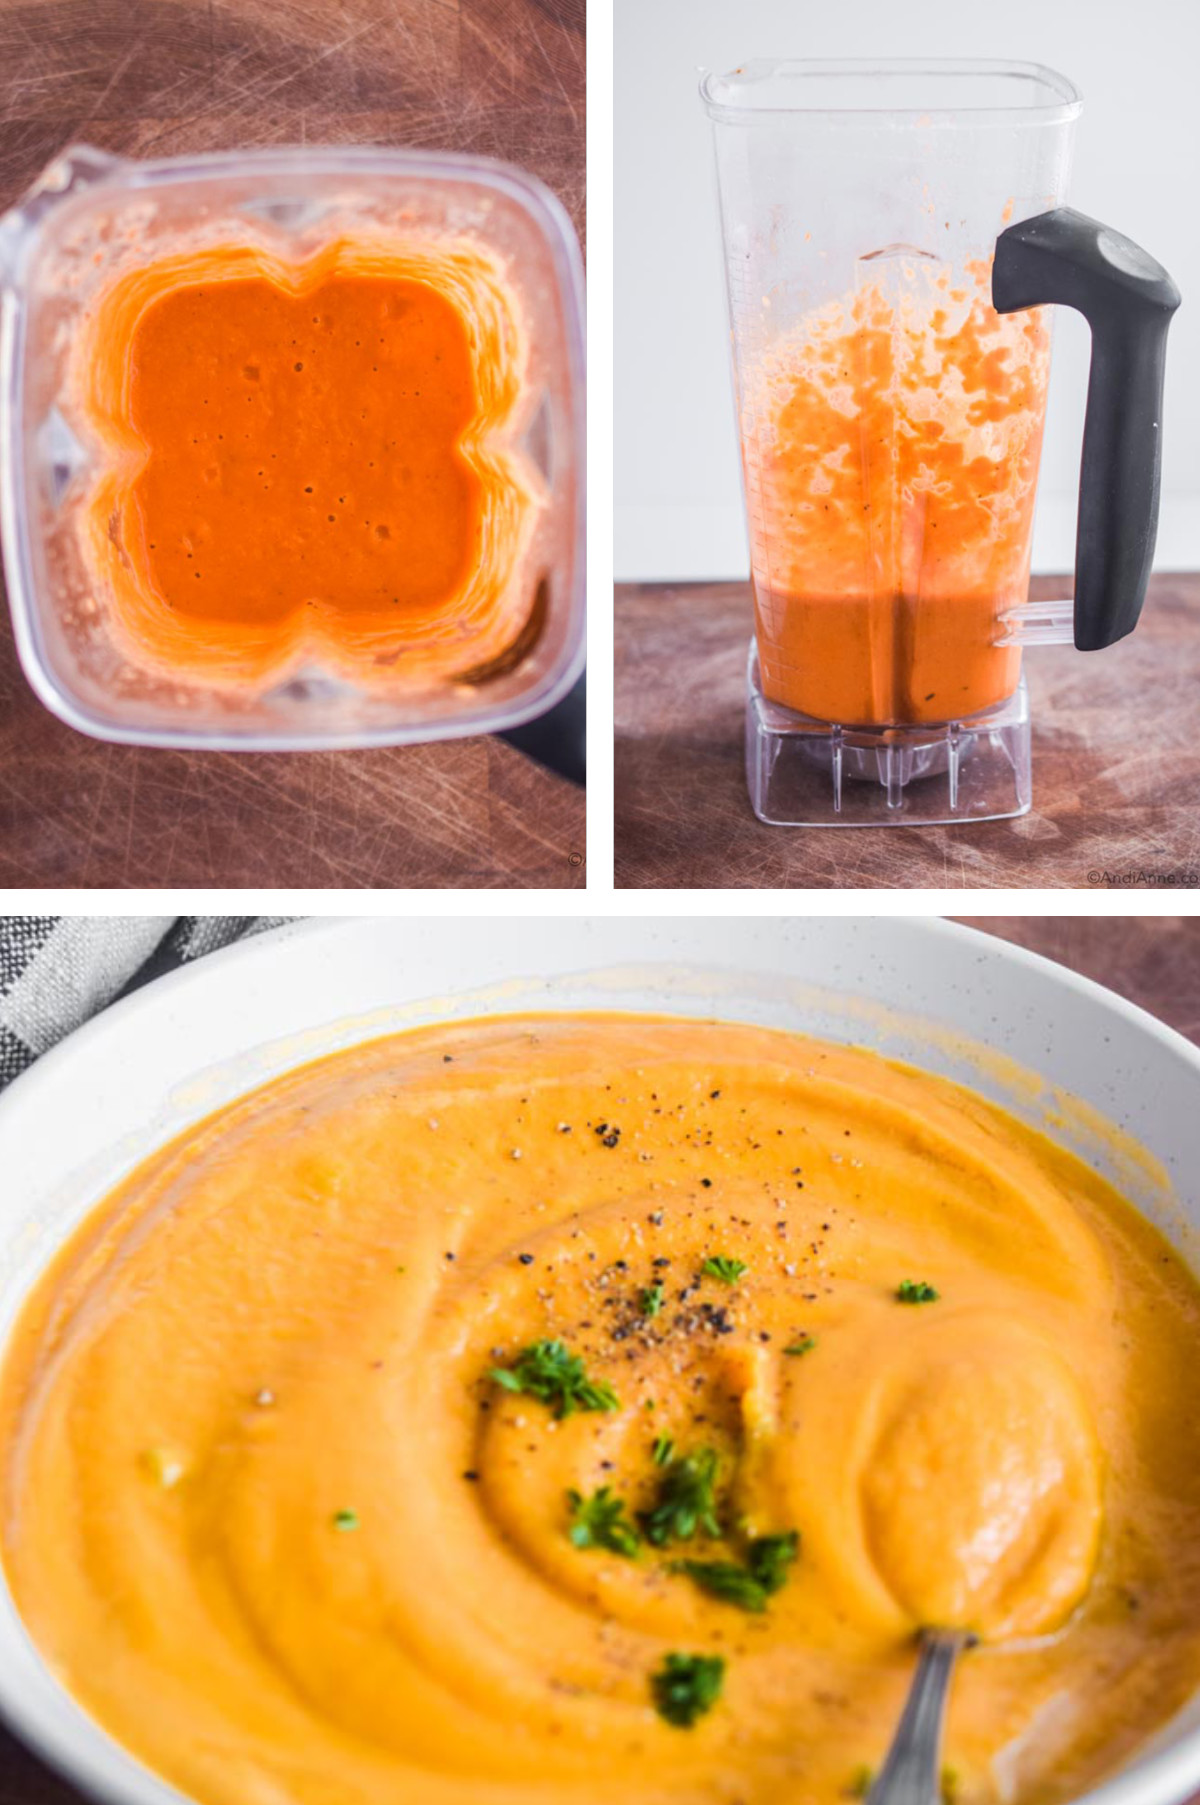 Three images in one: 1. Overhead view of soup in a blender. 2. Side view of soup blended in a blender. 3. Closeup of the blended soup in a white bowl garnished with parsley, salt and pepper. 